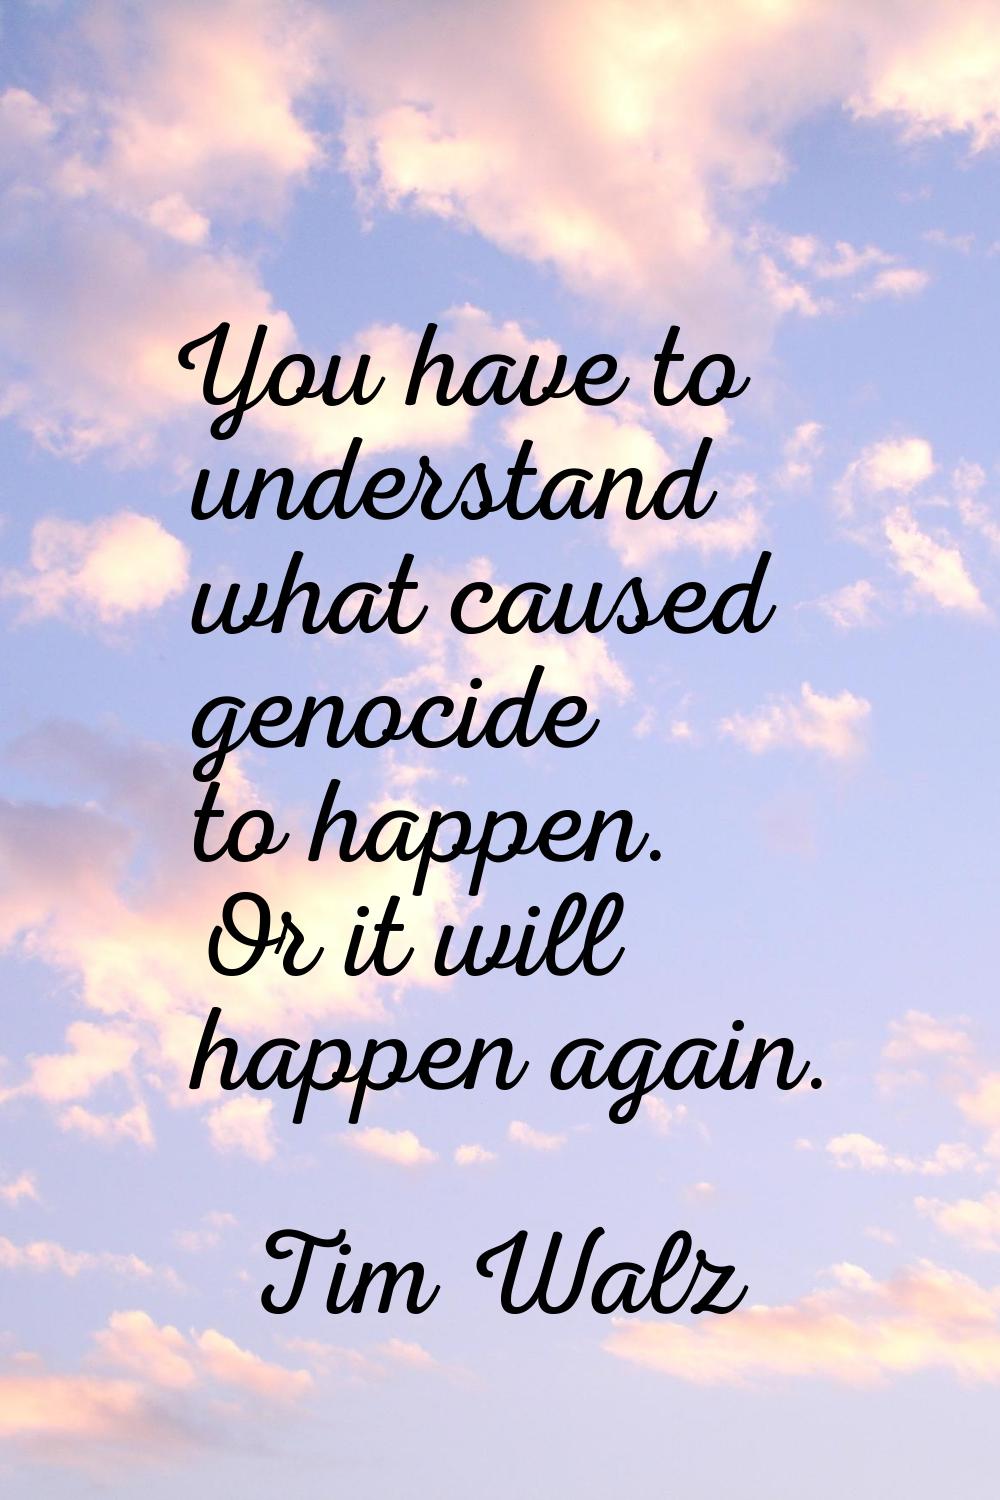 You have to understand what caused genocide to happen. Or it will happen again.